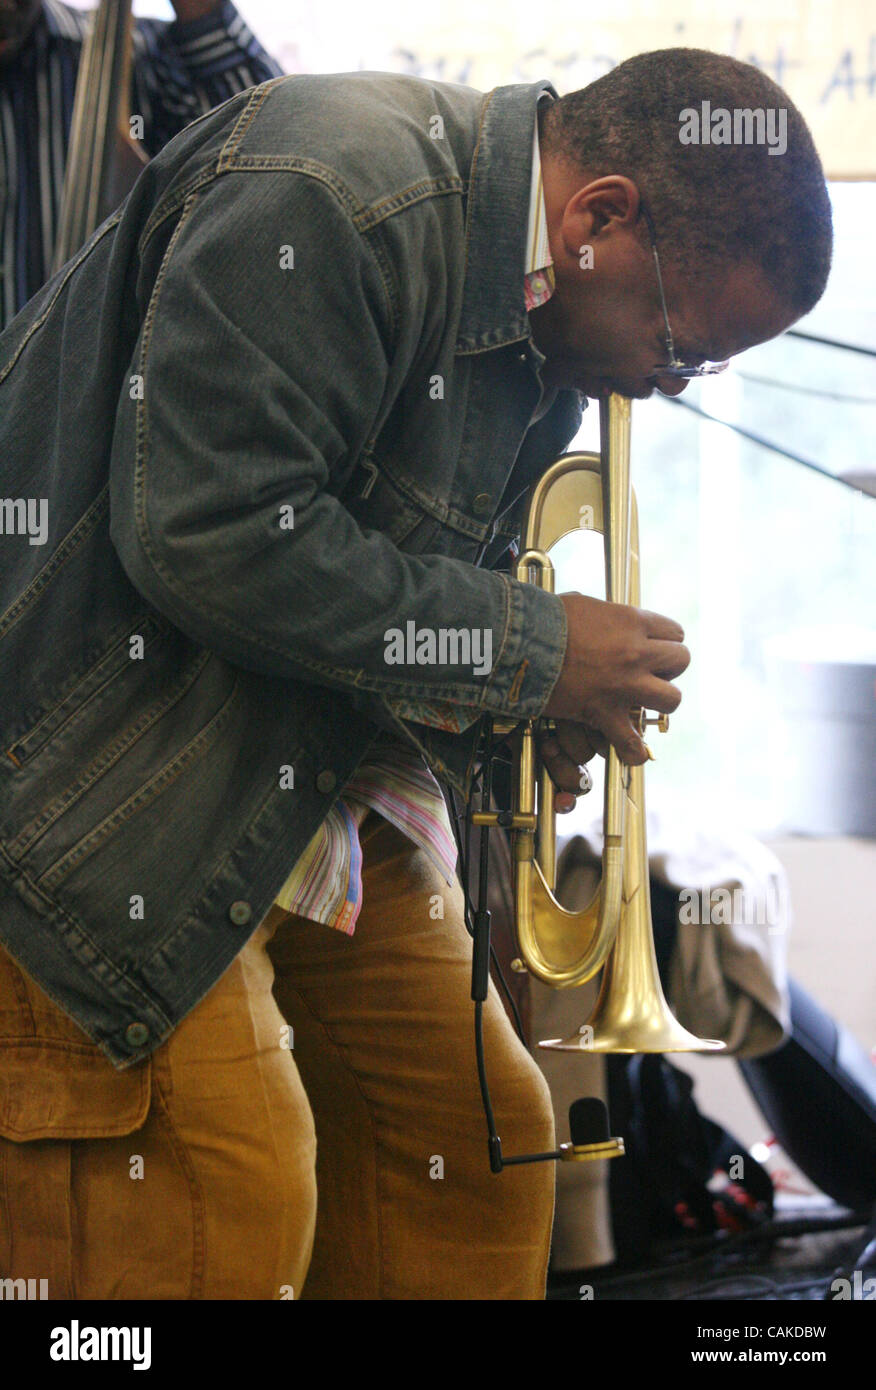 Sep 15, 2007 - New York, NY, USA - Jazz trumpeter, composer TERENCE BLANCHARD performs a live broadcast for WBGO Jazz 88.3 at J&R Music and Computer World. BLANCHARD, from New Orleans, promotes his new CD 'A Tale of God's Will : A Requiem for Katrina.' (Credit Image: © Nancy Kaszerman/ZUMA Press) Stock Photo